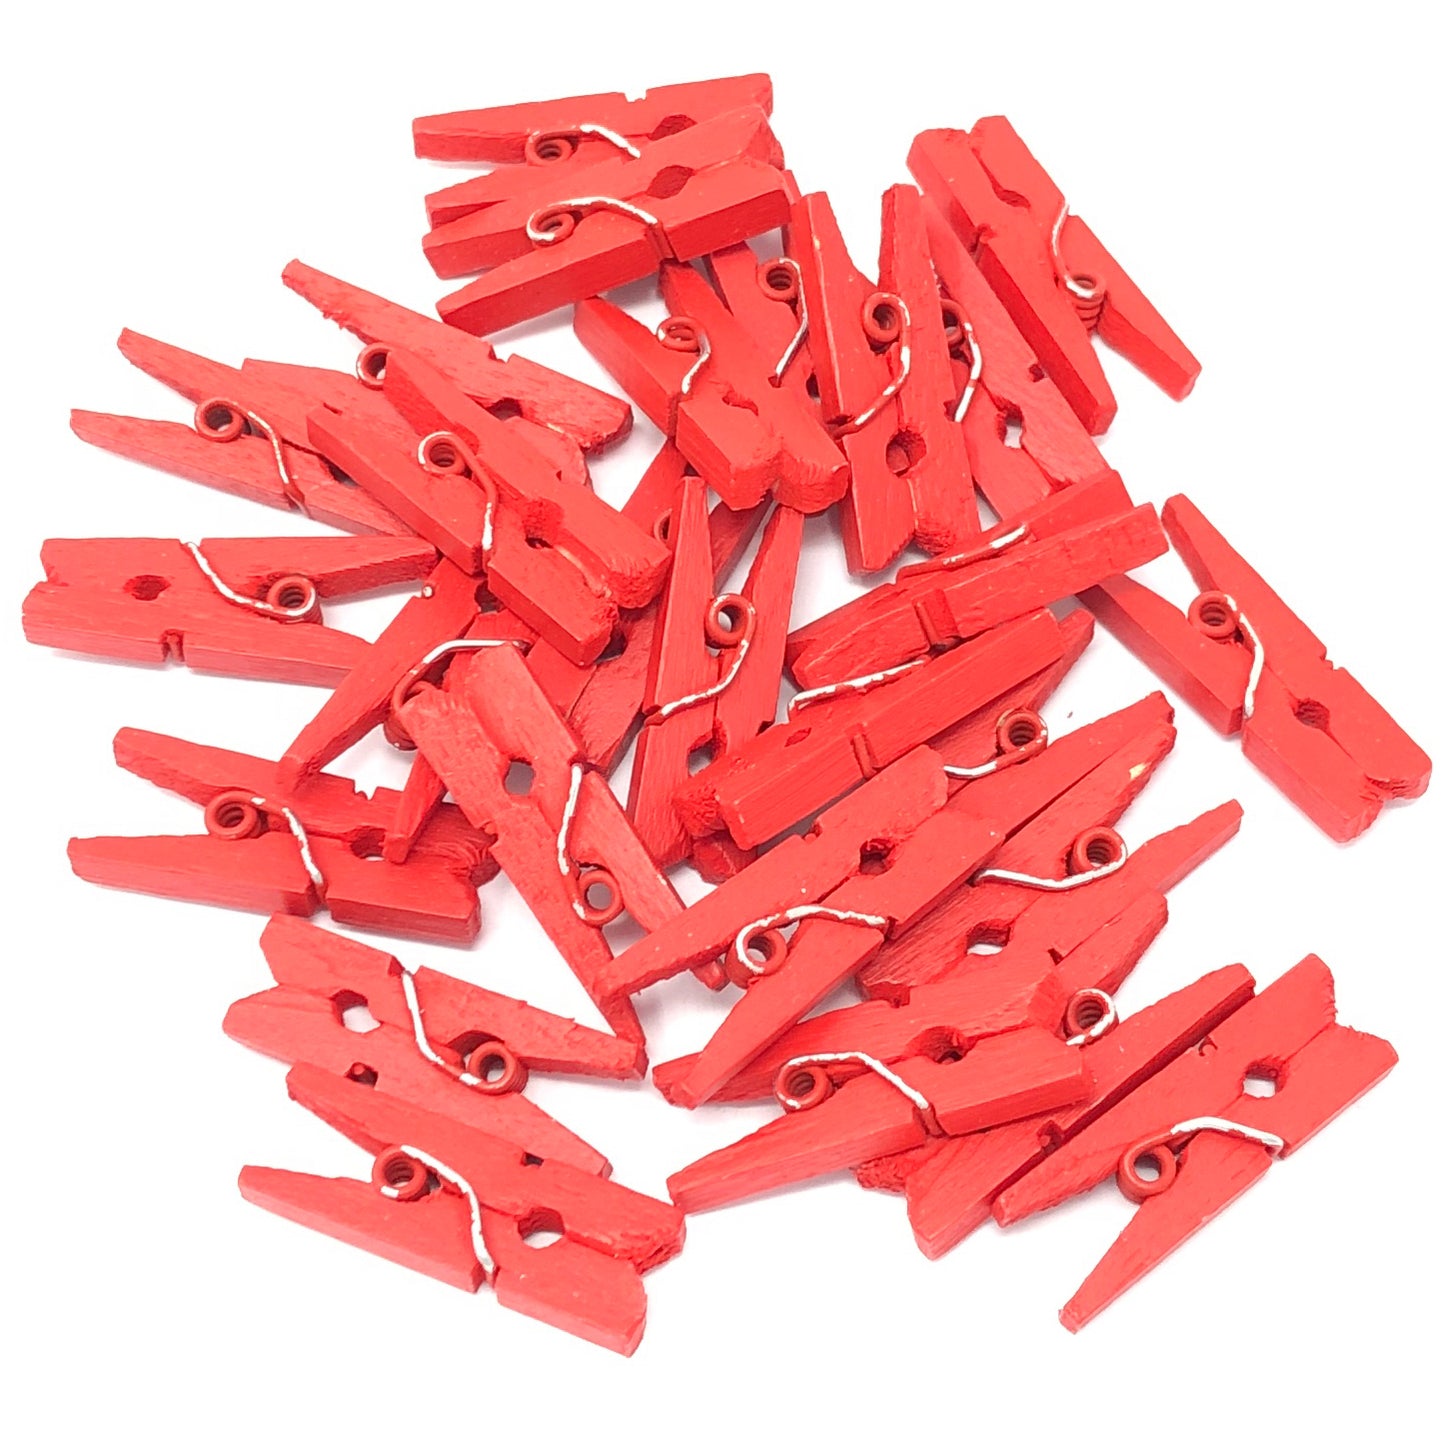 Red 25mm Mini Coloured Wooden Clothes Pegs